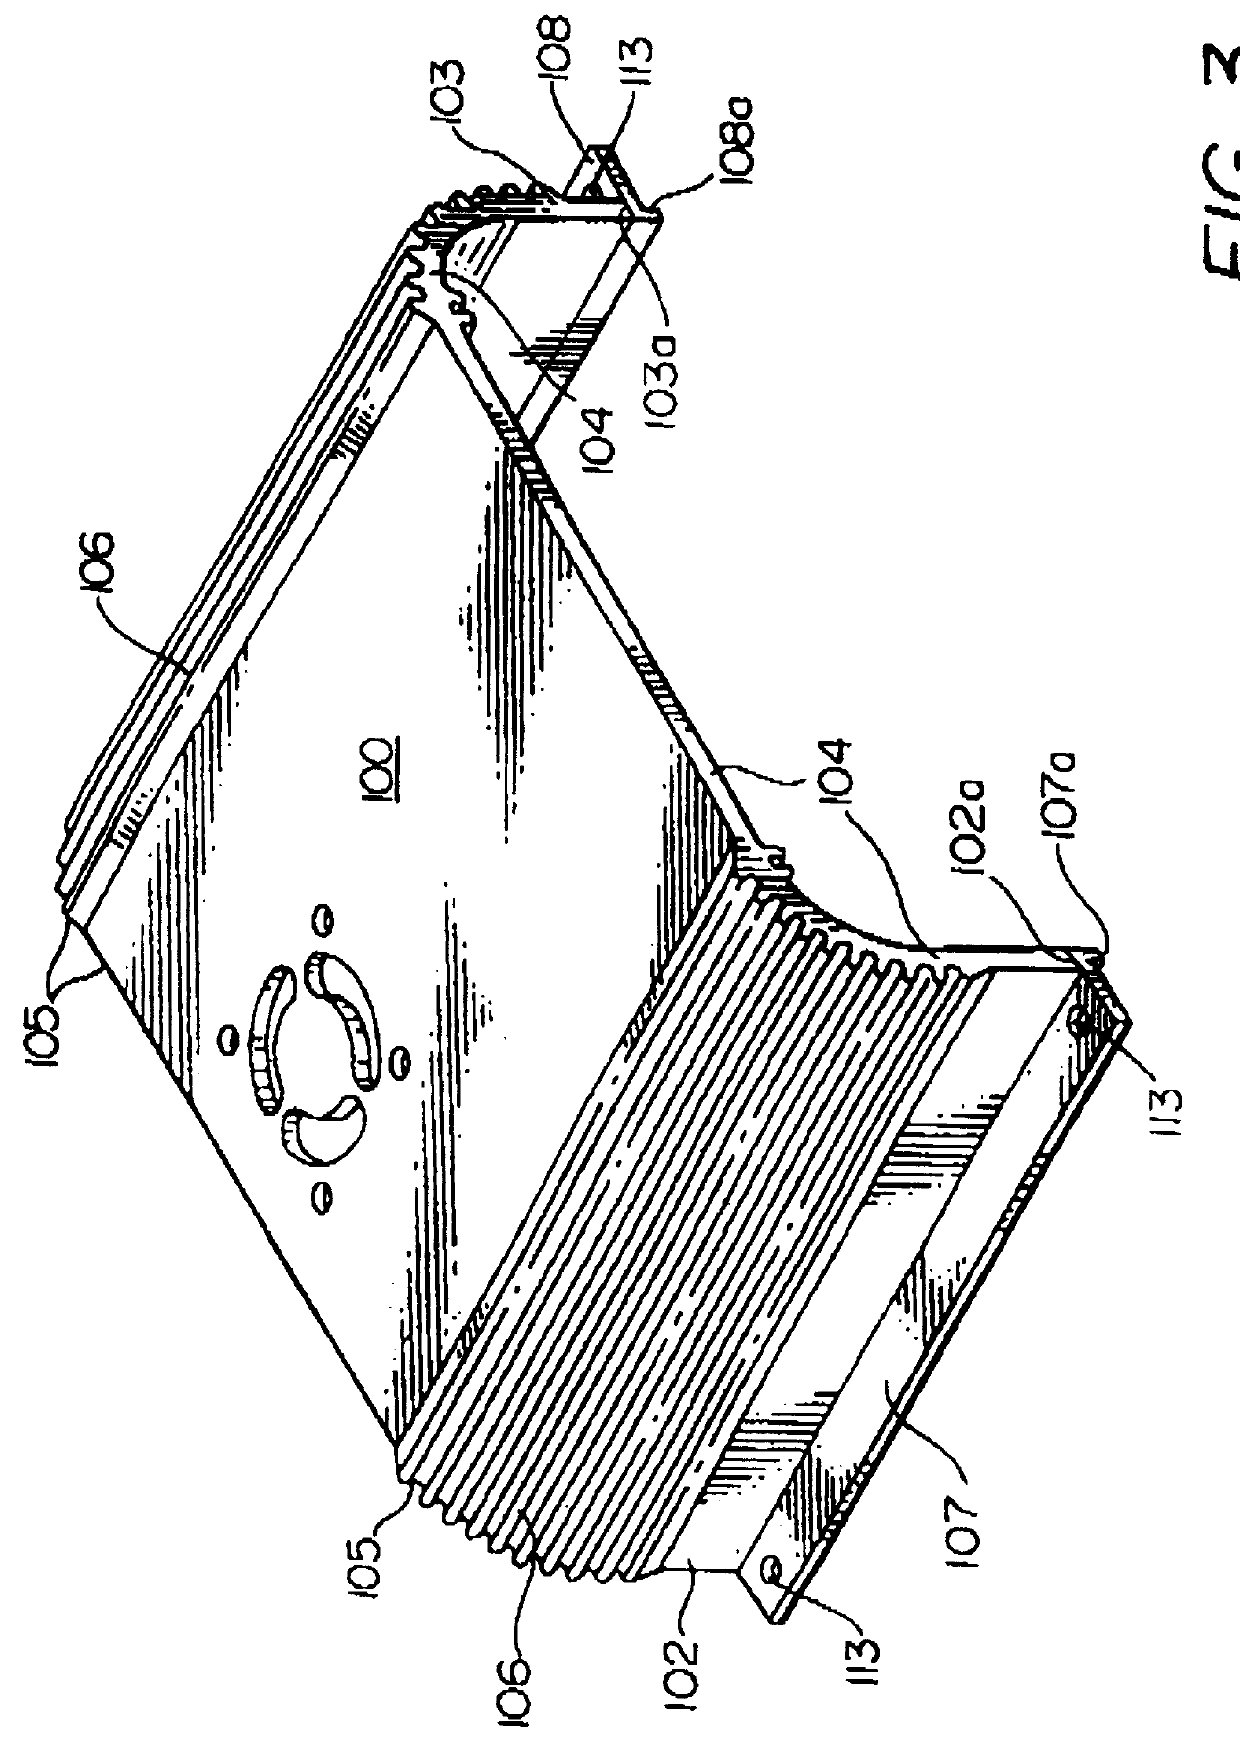 Heat dissipating housing for electronic components